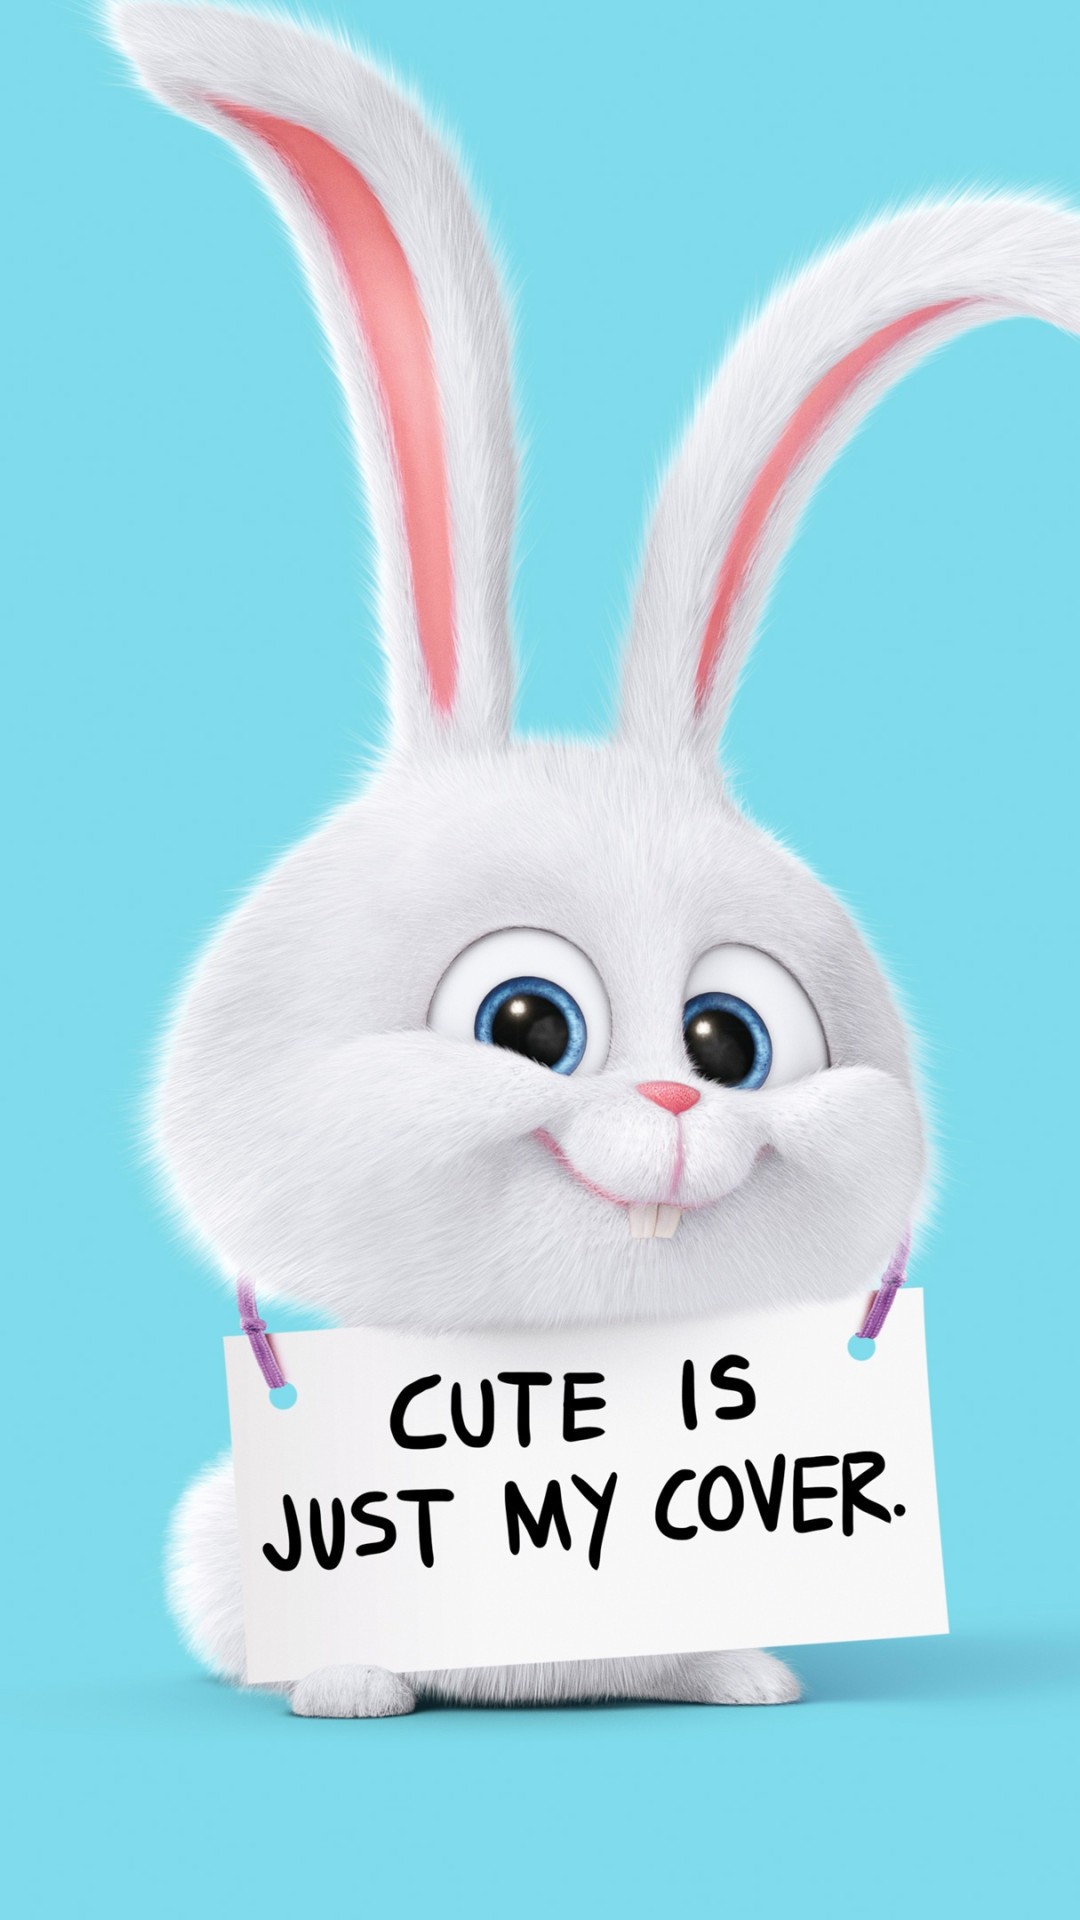 1080x1920 Cute Is Just My Cover Rabbit Android Wallpaper